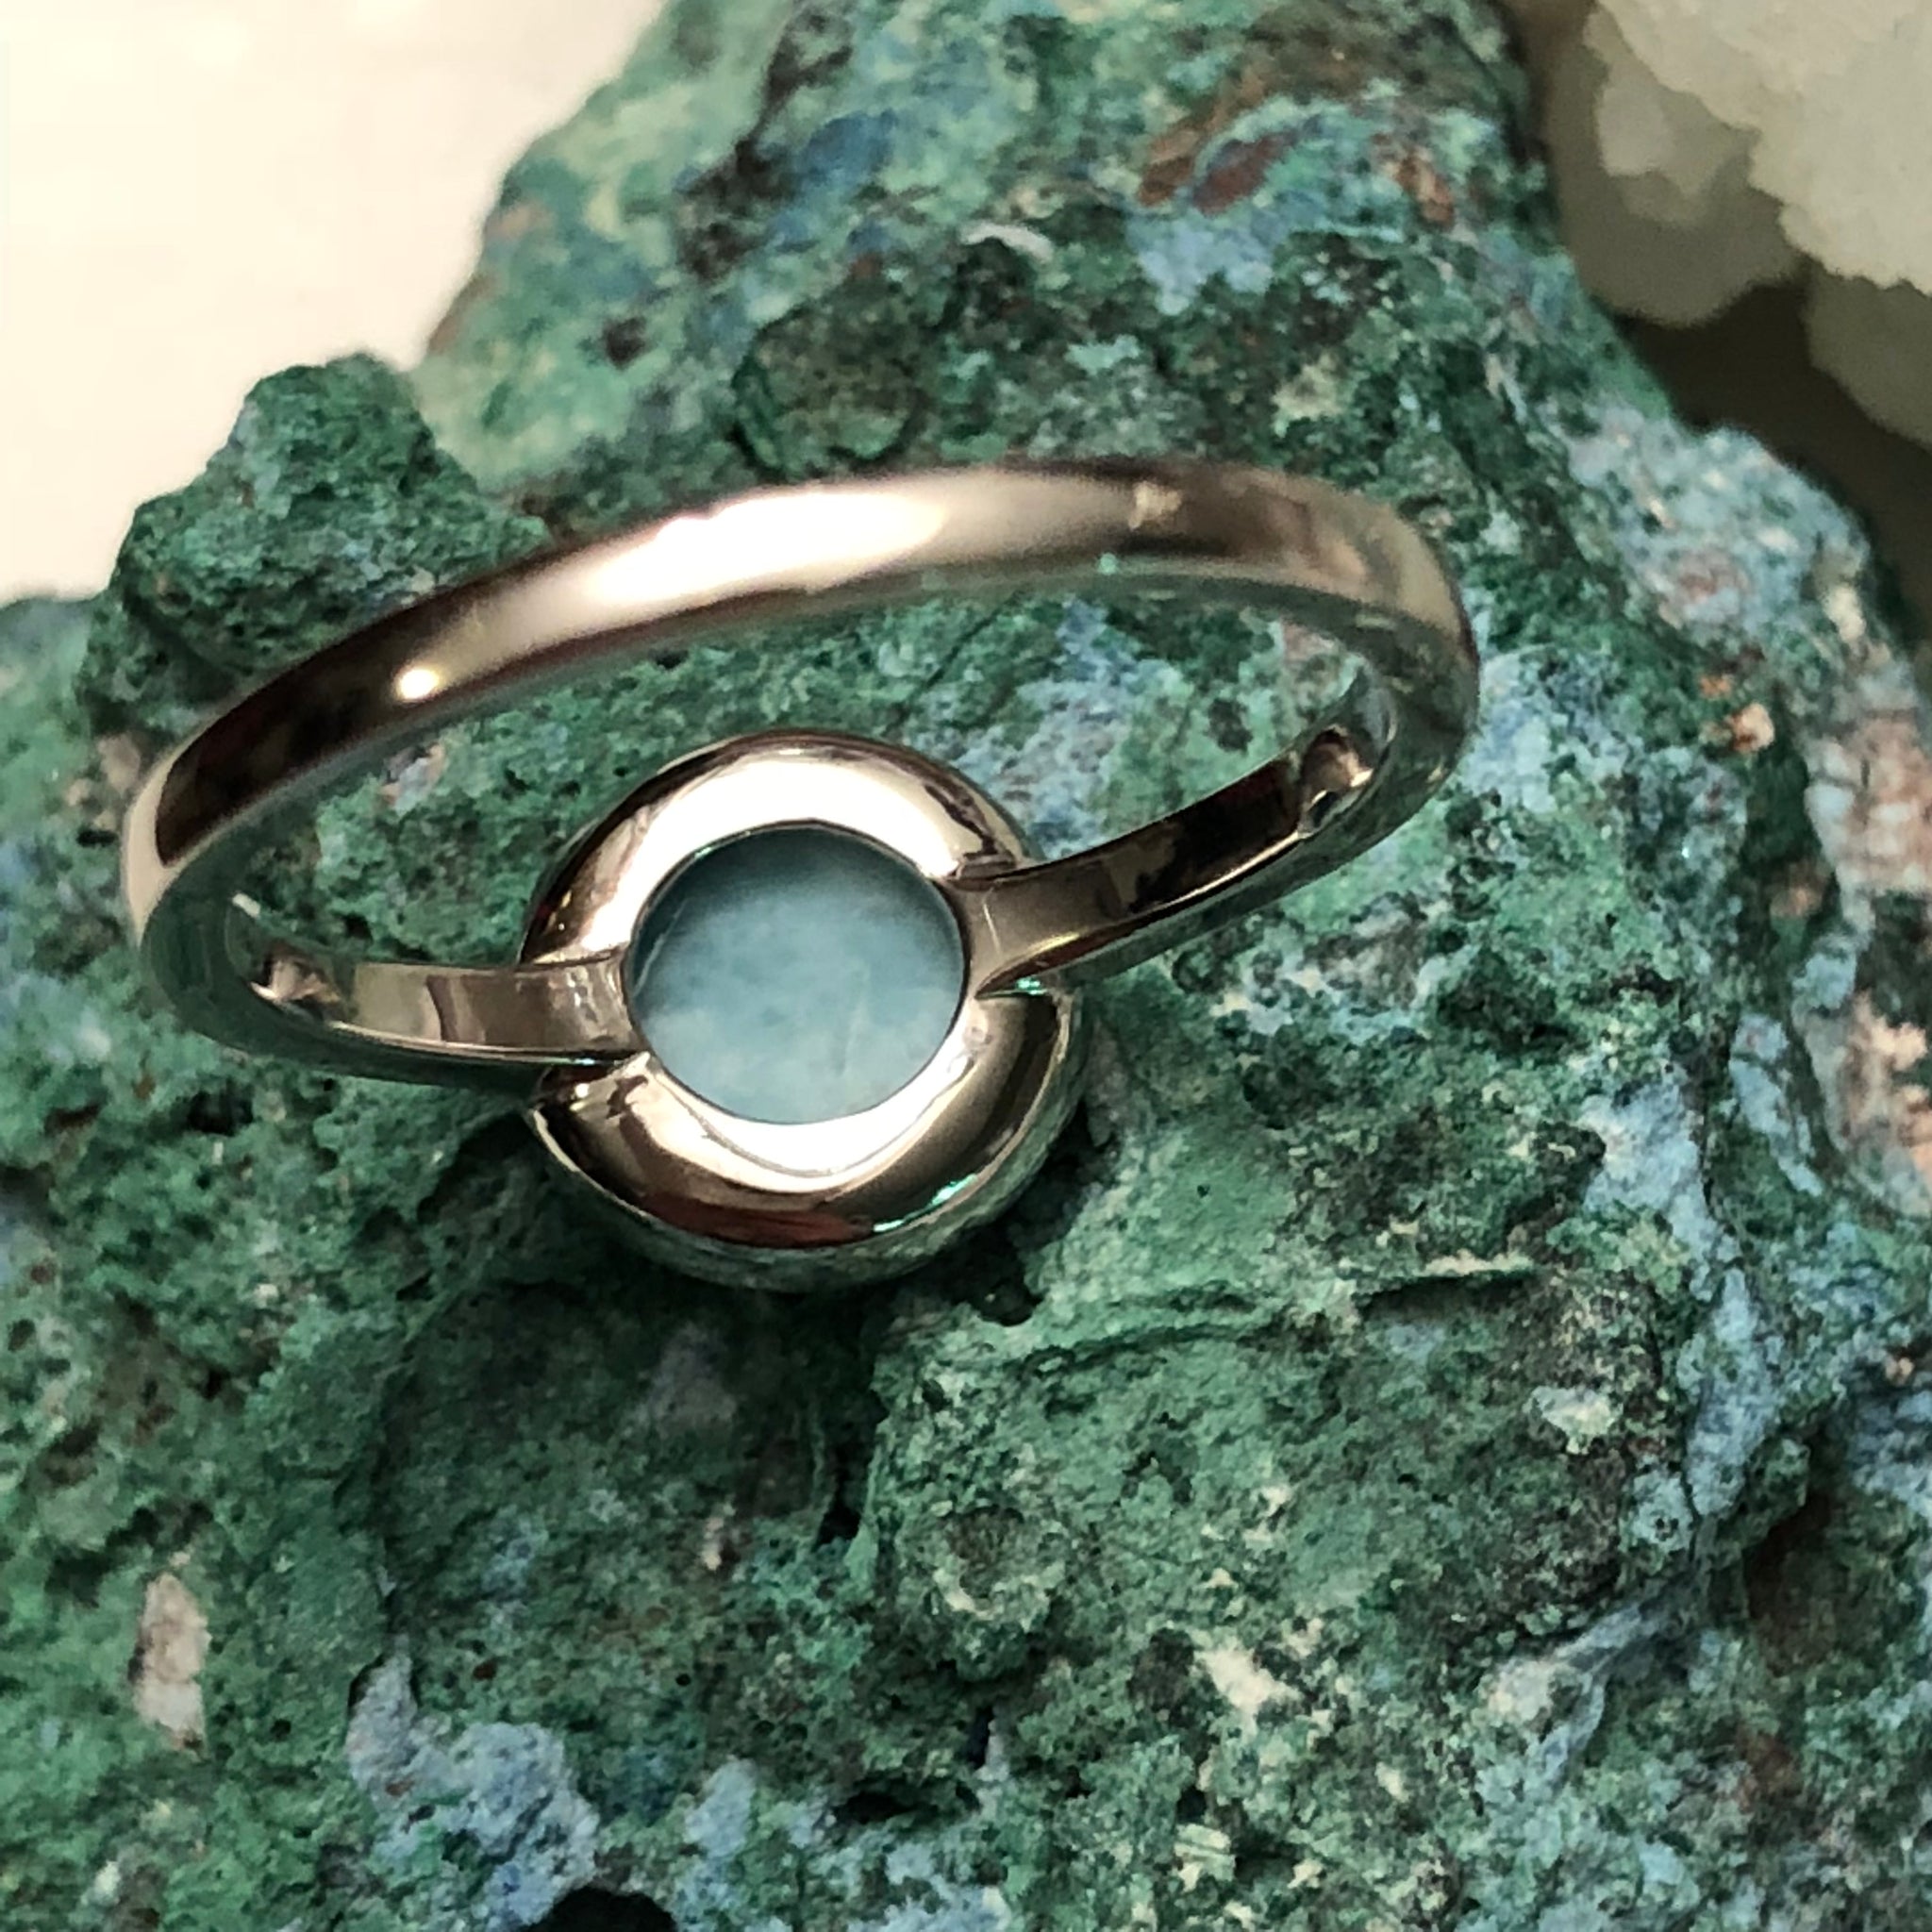 Larimar Ring + Sterling Silver Jewelry + FREE Gift Box + FREE Shipping  Codes - AlphaVariable